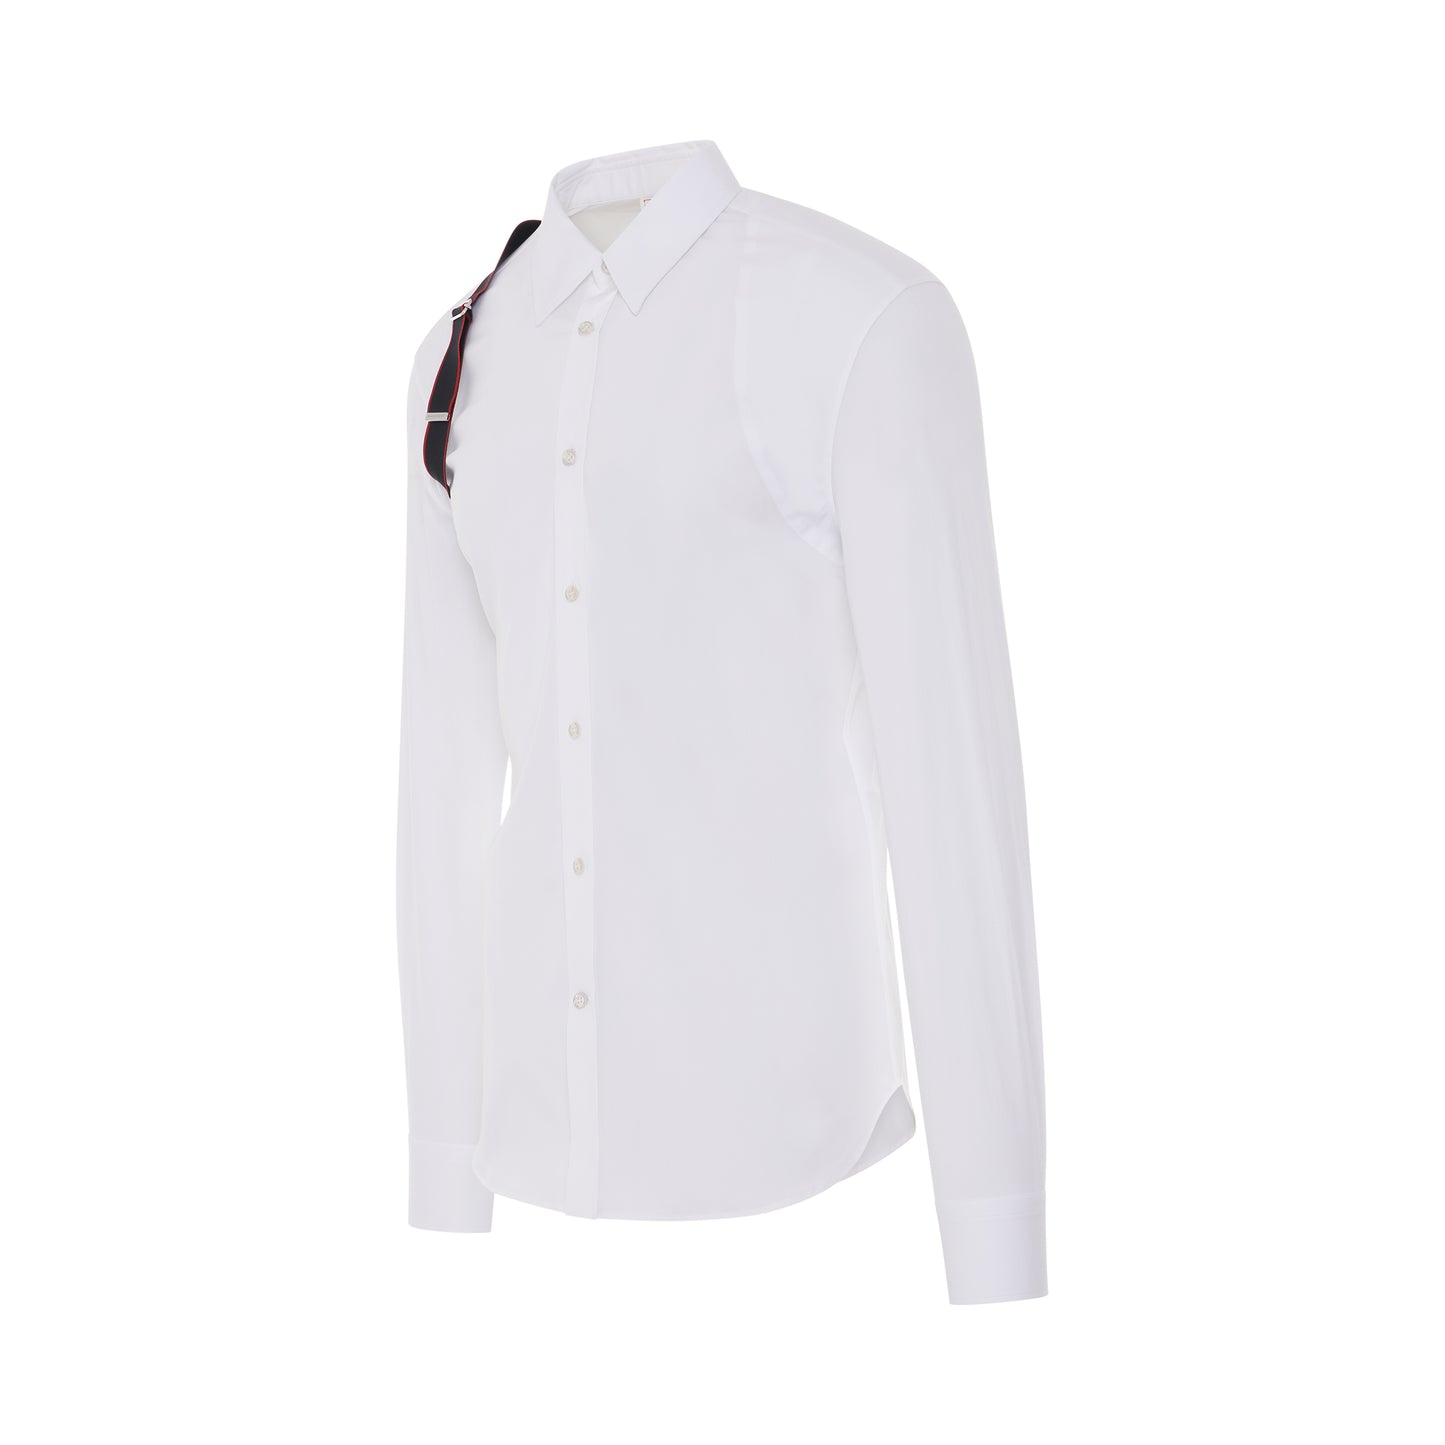 Shoulder Harness Shirt in White